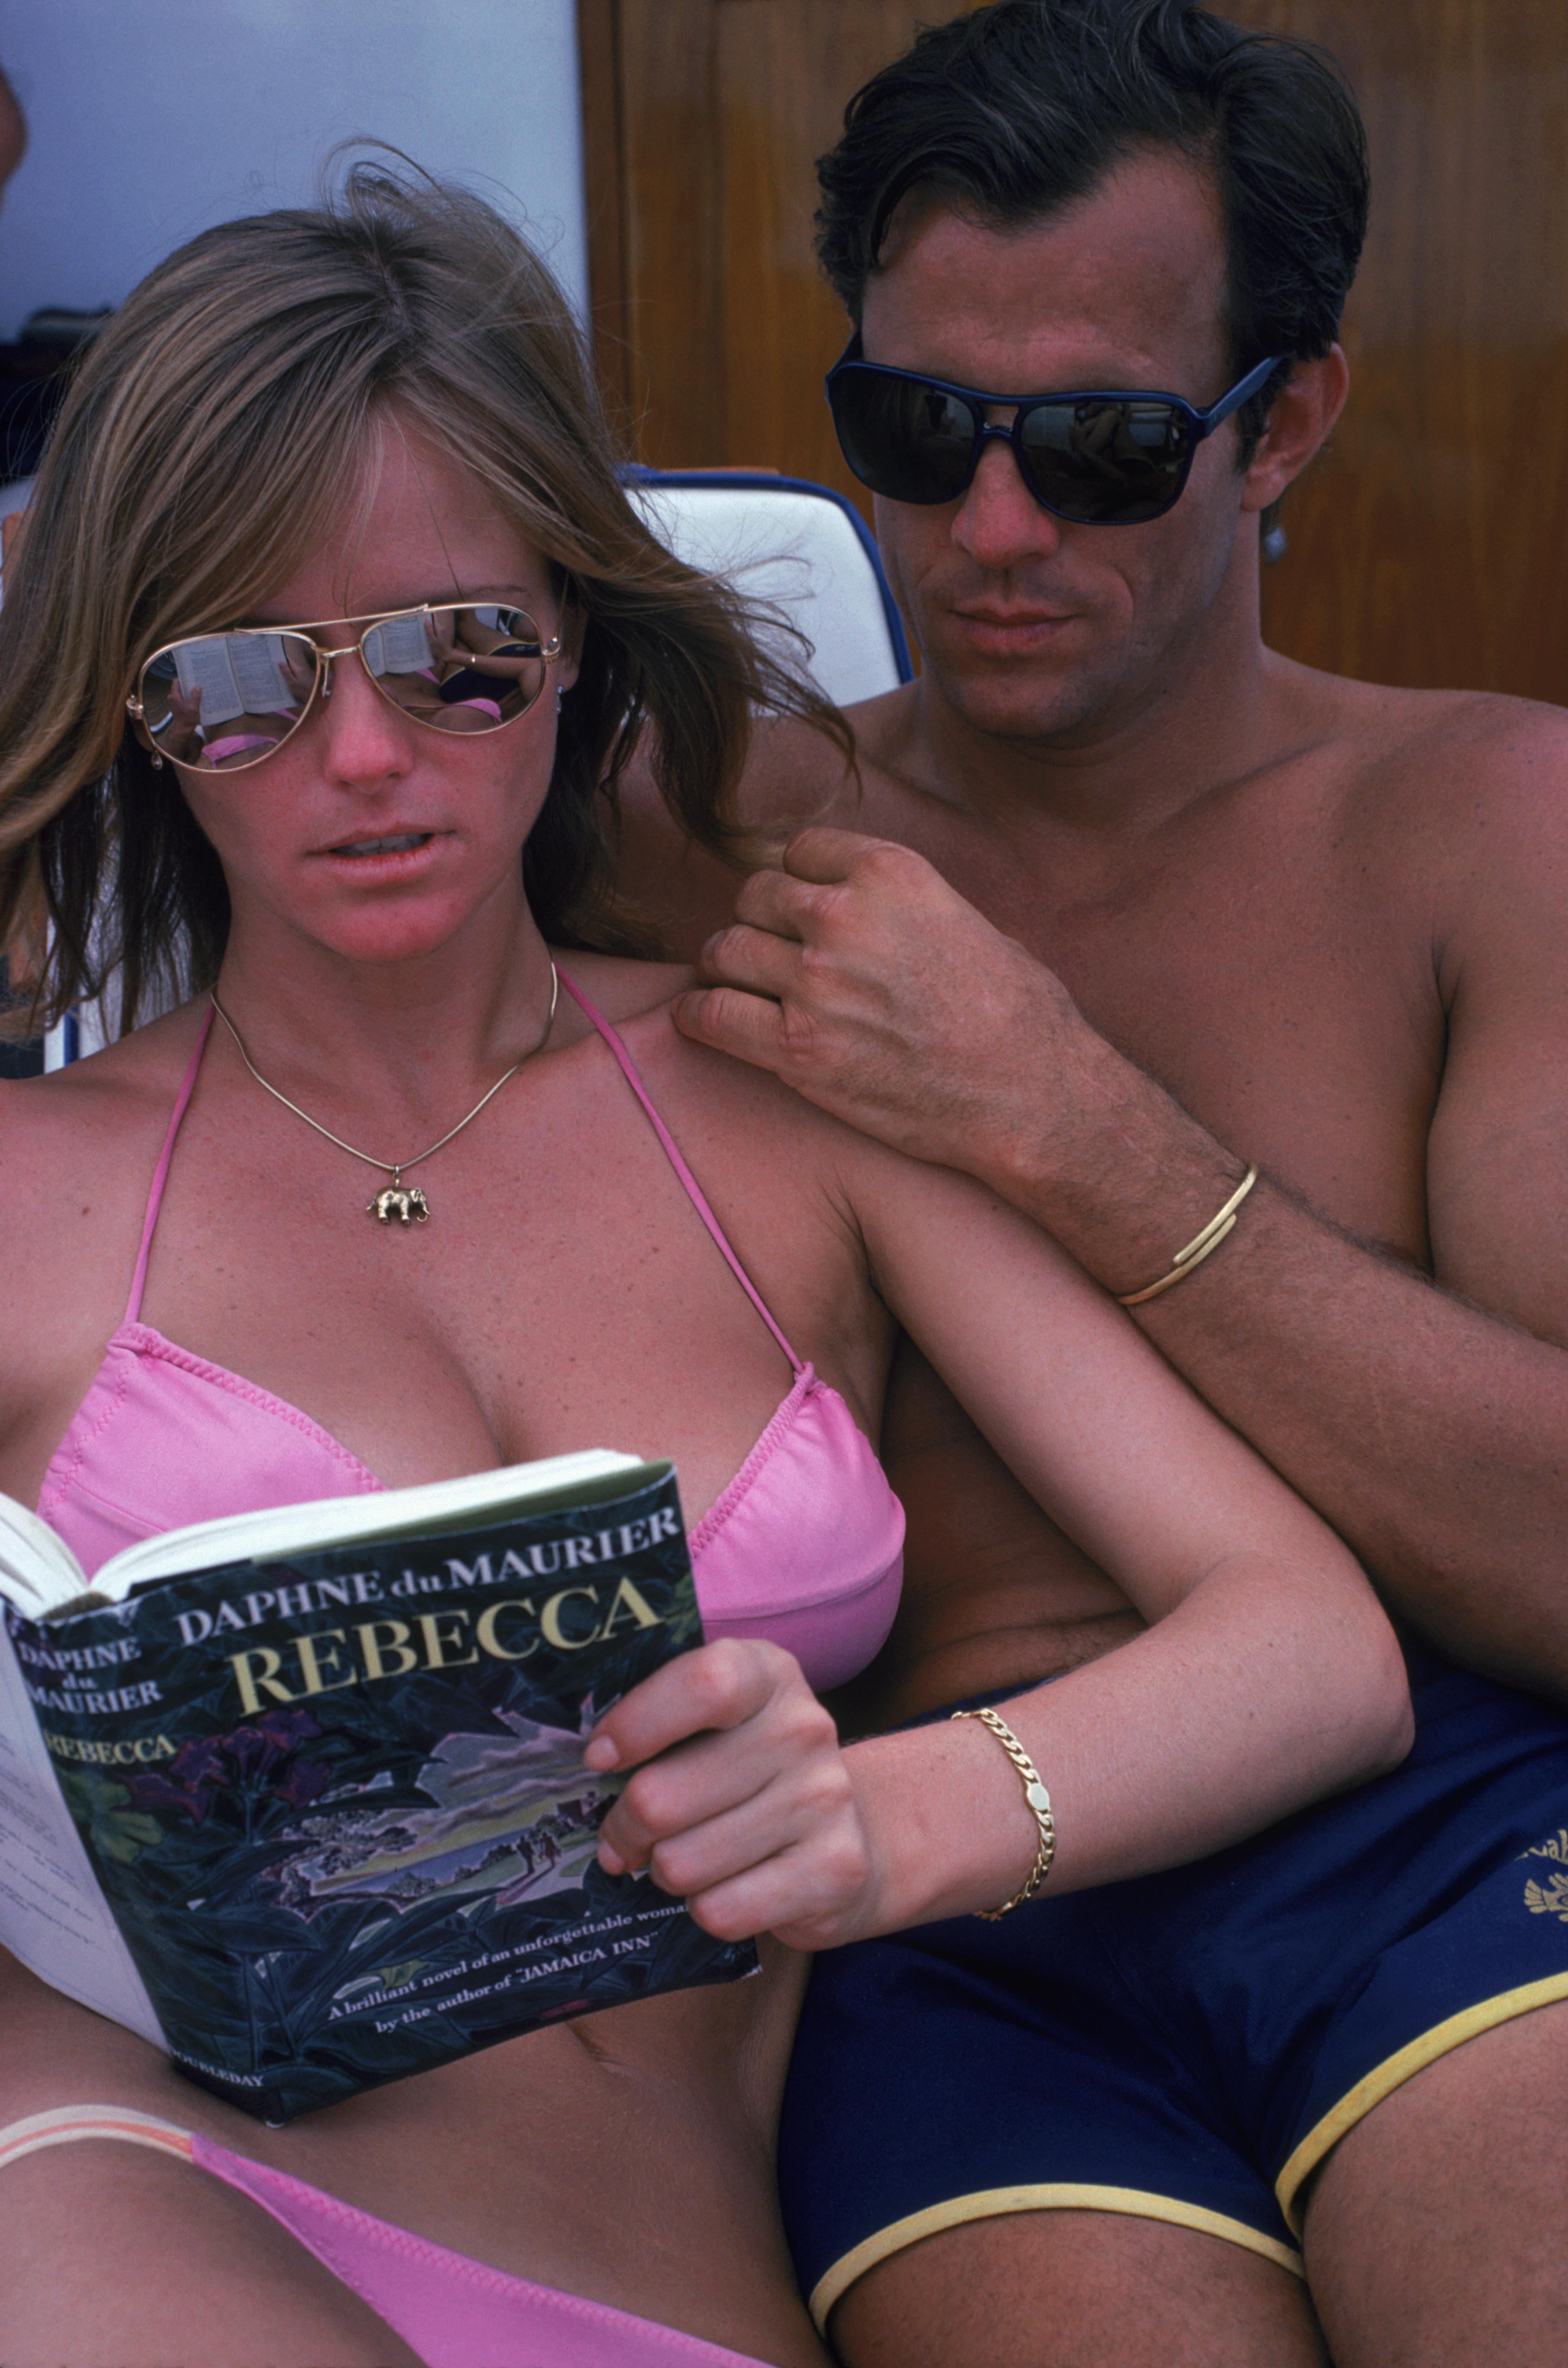 Slim Aarons
A Relaxing Read, 1982
Chromogenic Lambda print
Estate stamped and hand numbered edition of 150 with certificate of authenticity. 

Cheryl Tiegs and her husband Peter Beard on the island of Turks and Caicos Islands in the West Indies,